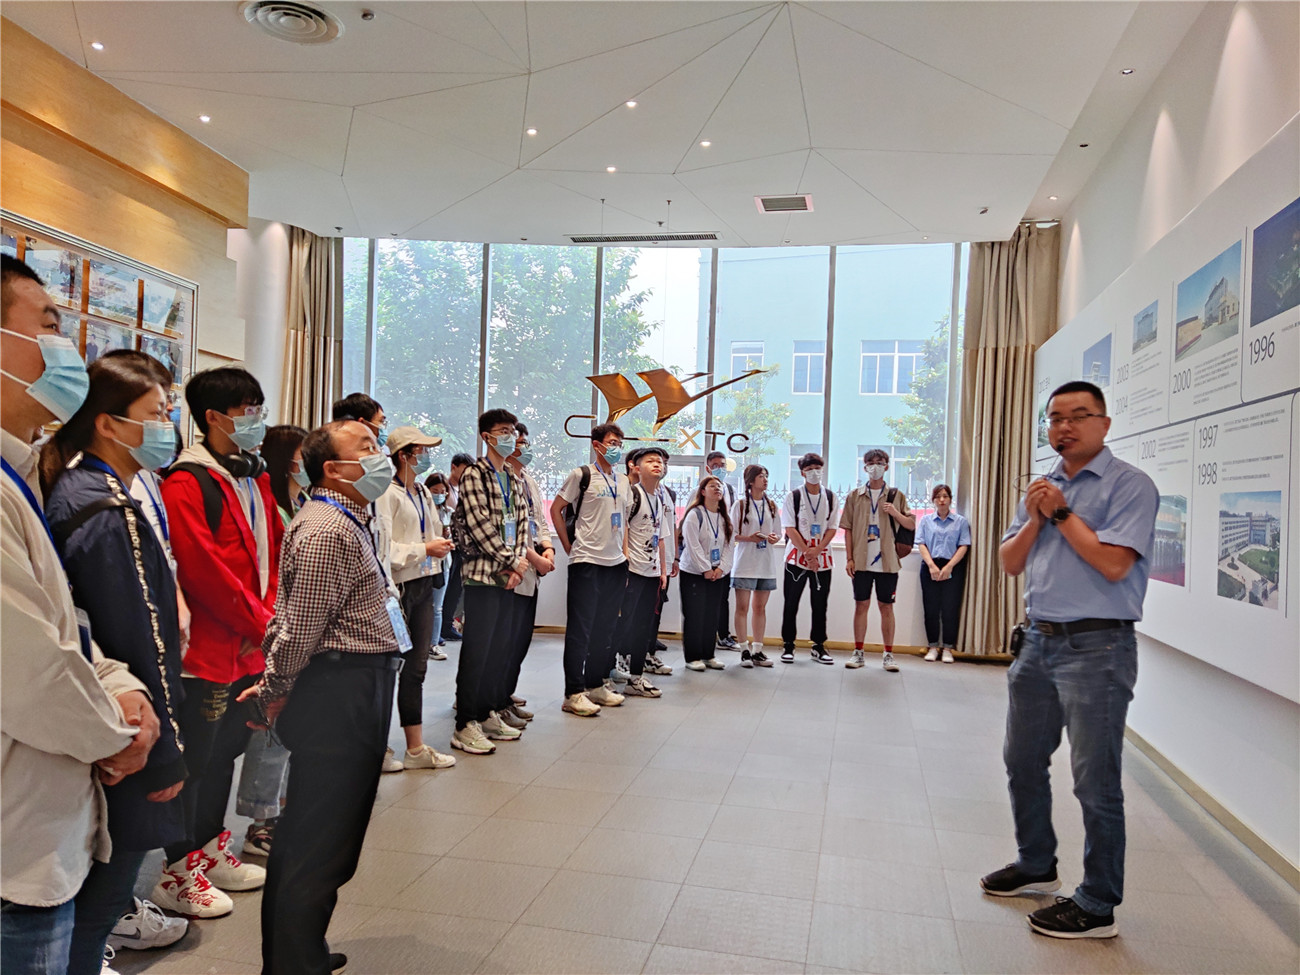 Teachers and students from the School of Materials Science and Engineering of Zhengzhou University visited our company for exchange